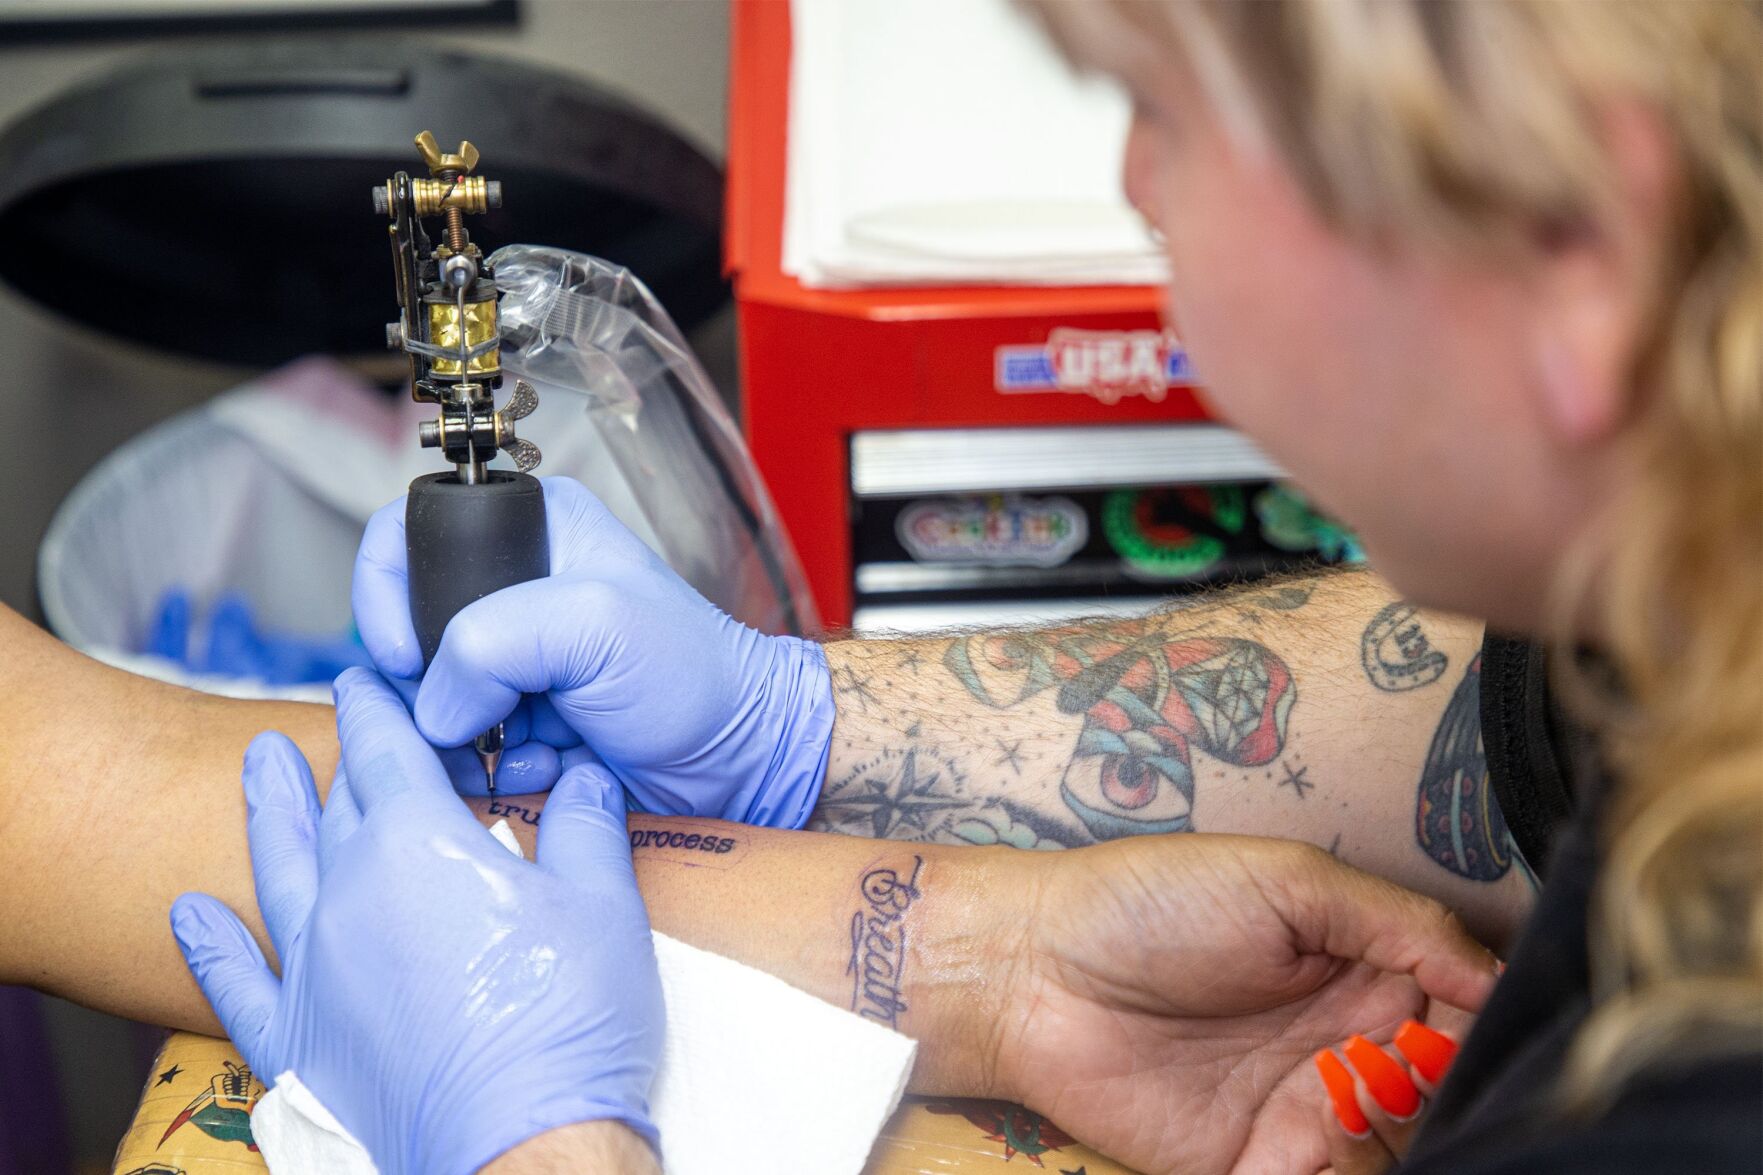 How to Get a Tattoo License in the USA